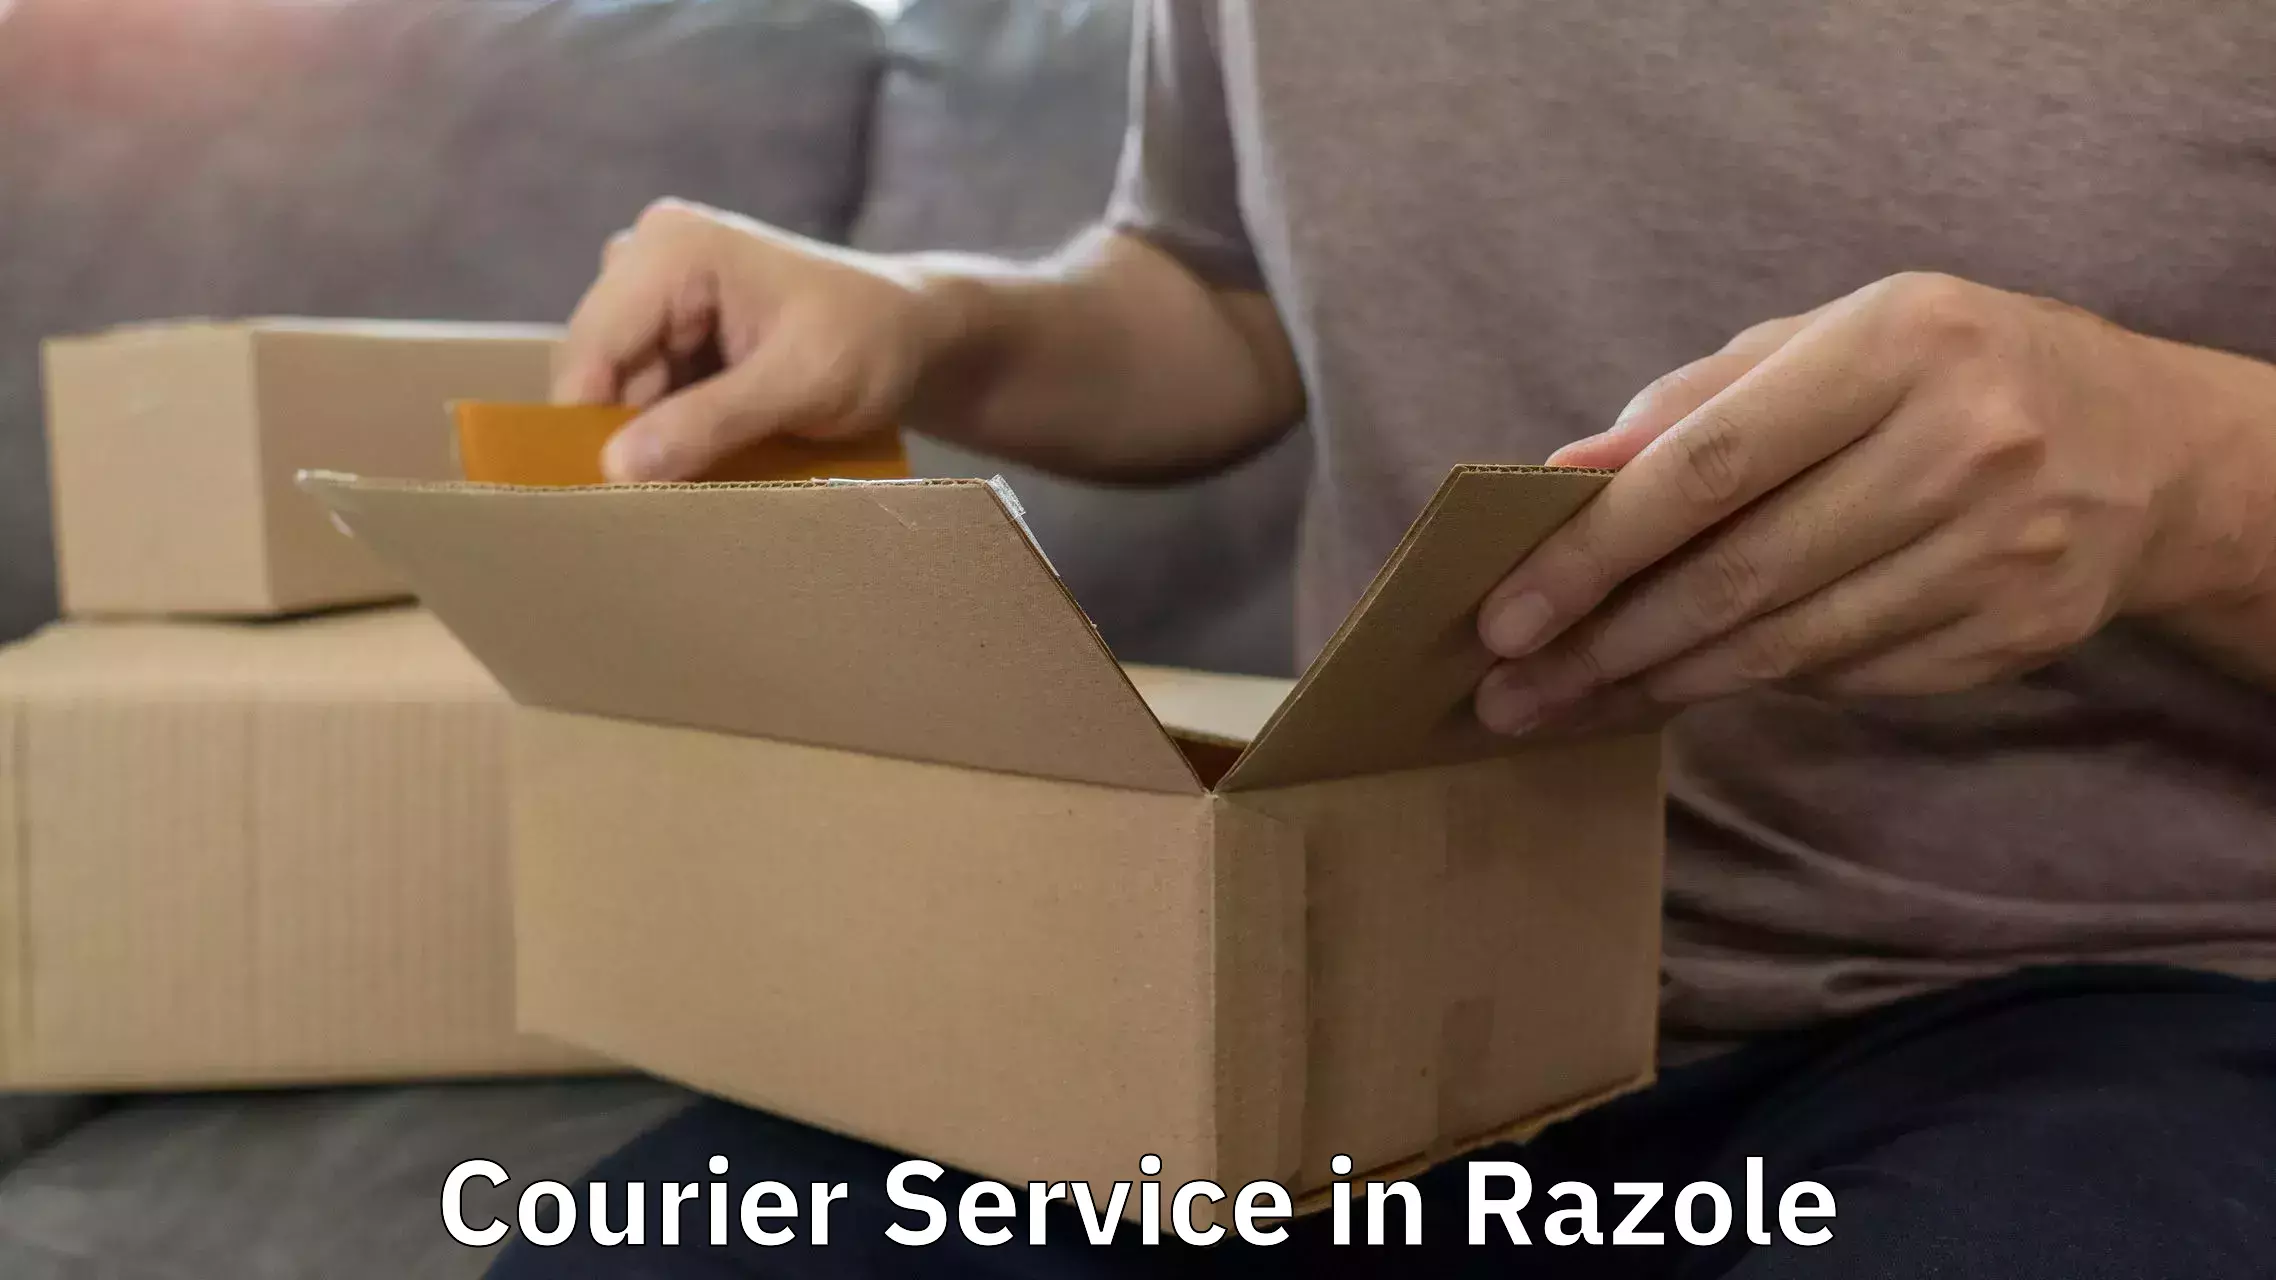 Postal and courier services in Razole